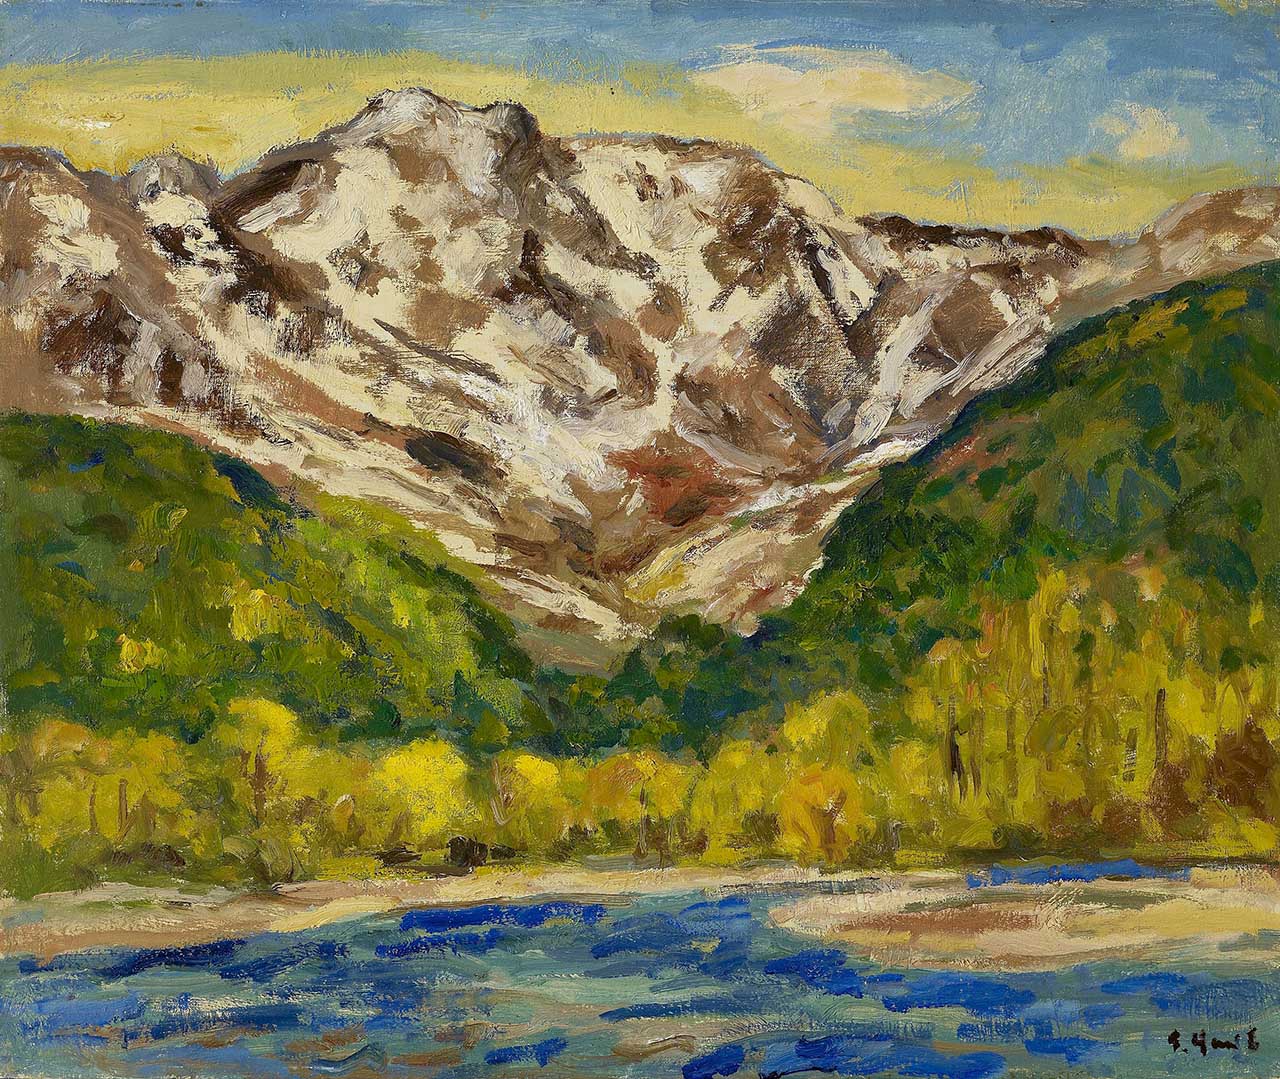 Snowy Mountain (Foothill of White Horse Mountain) Oil on canvas 60.7x72.5 cm